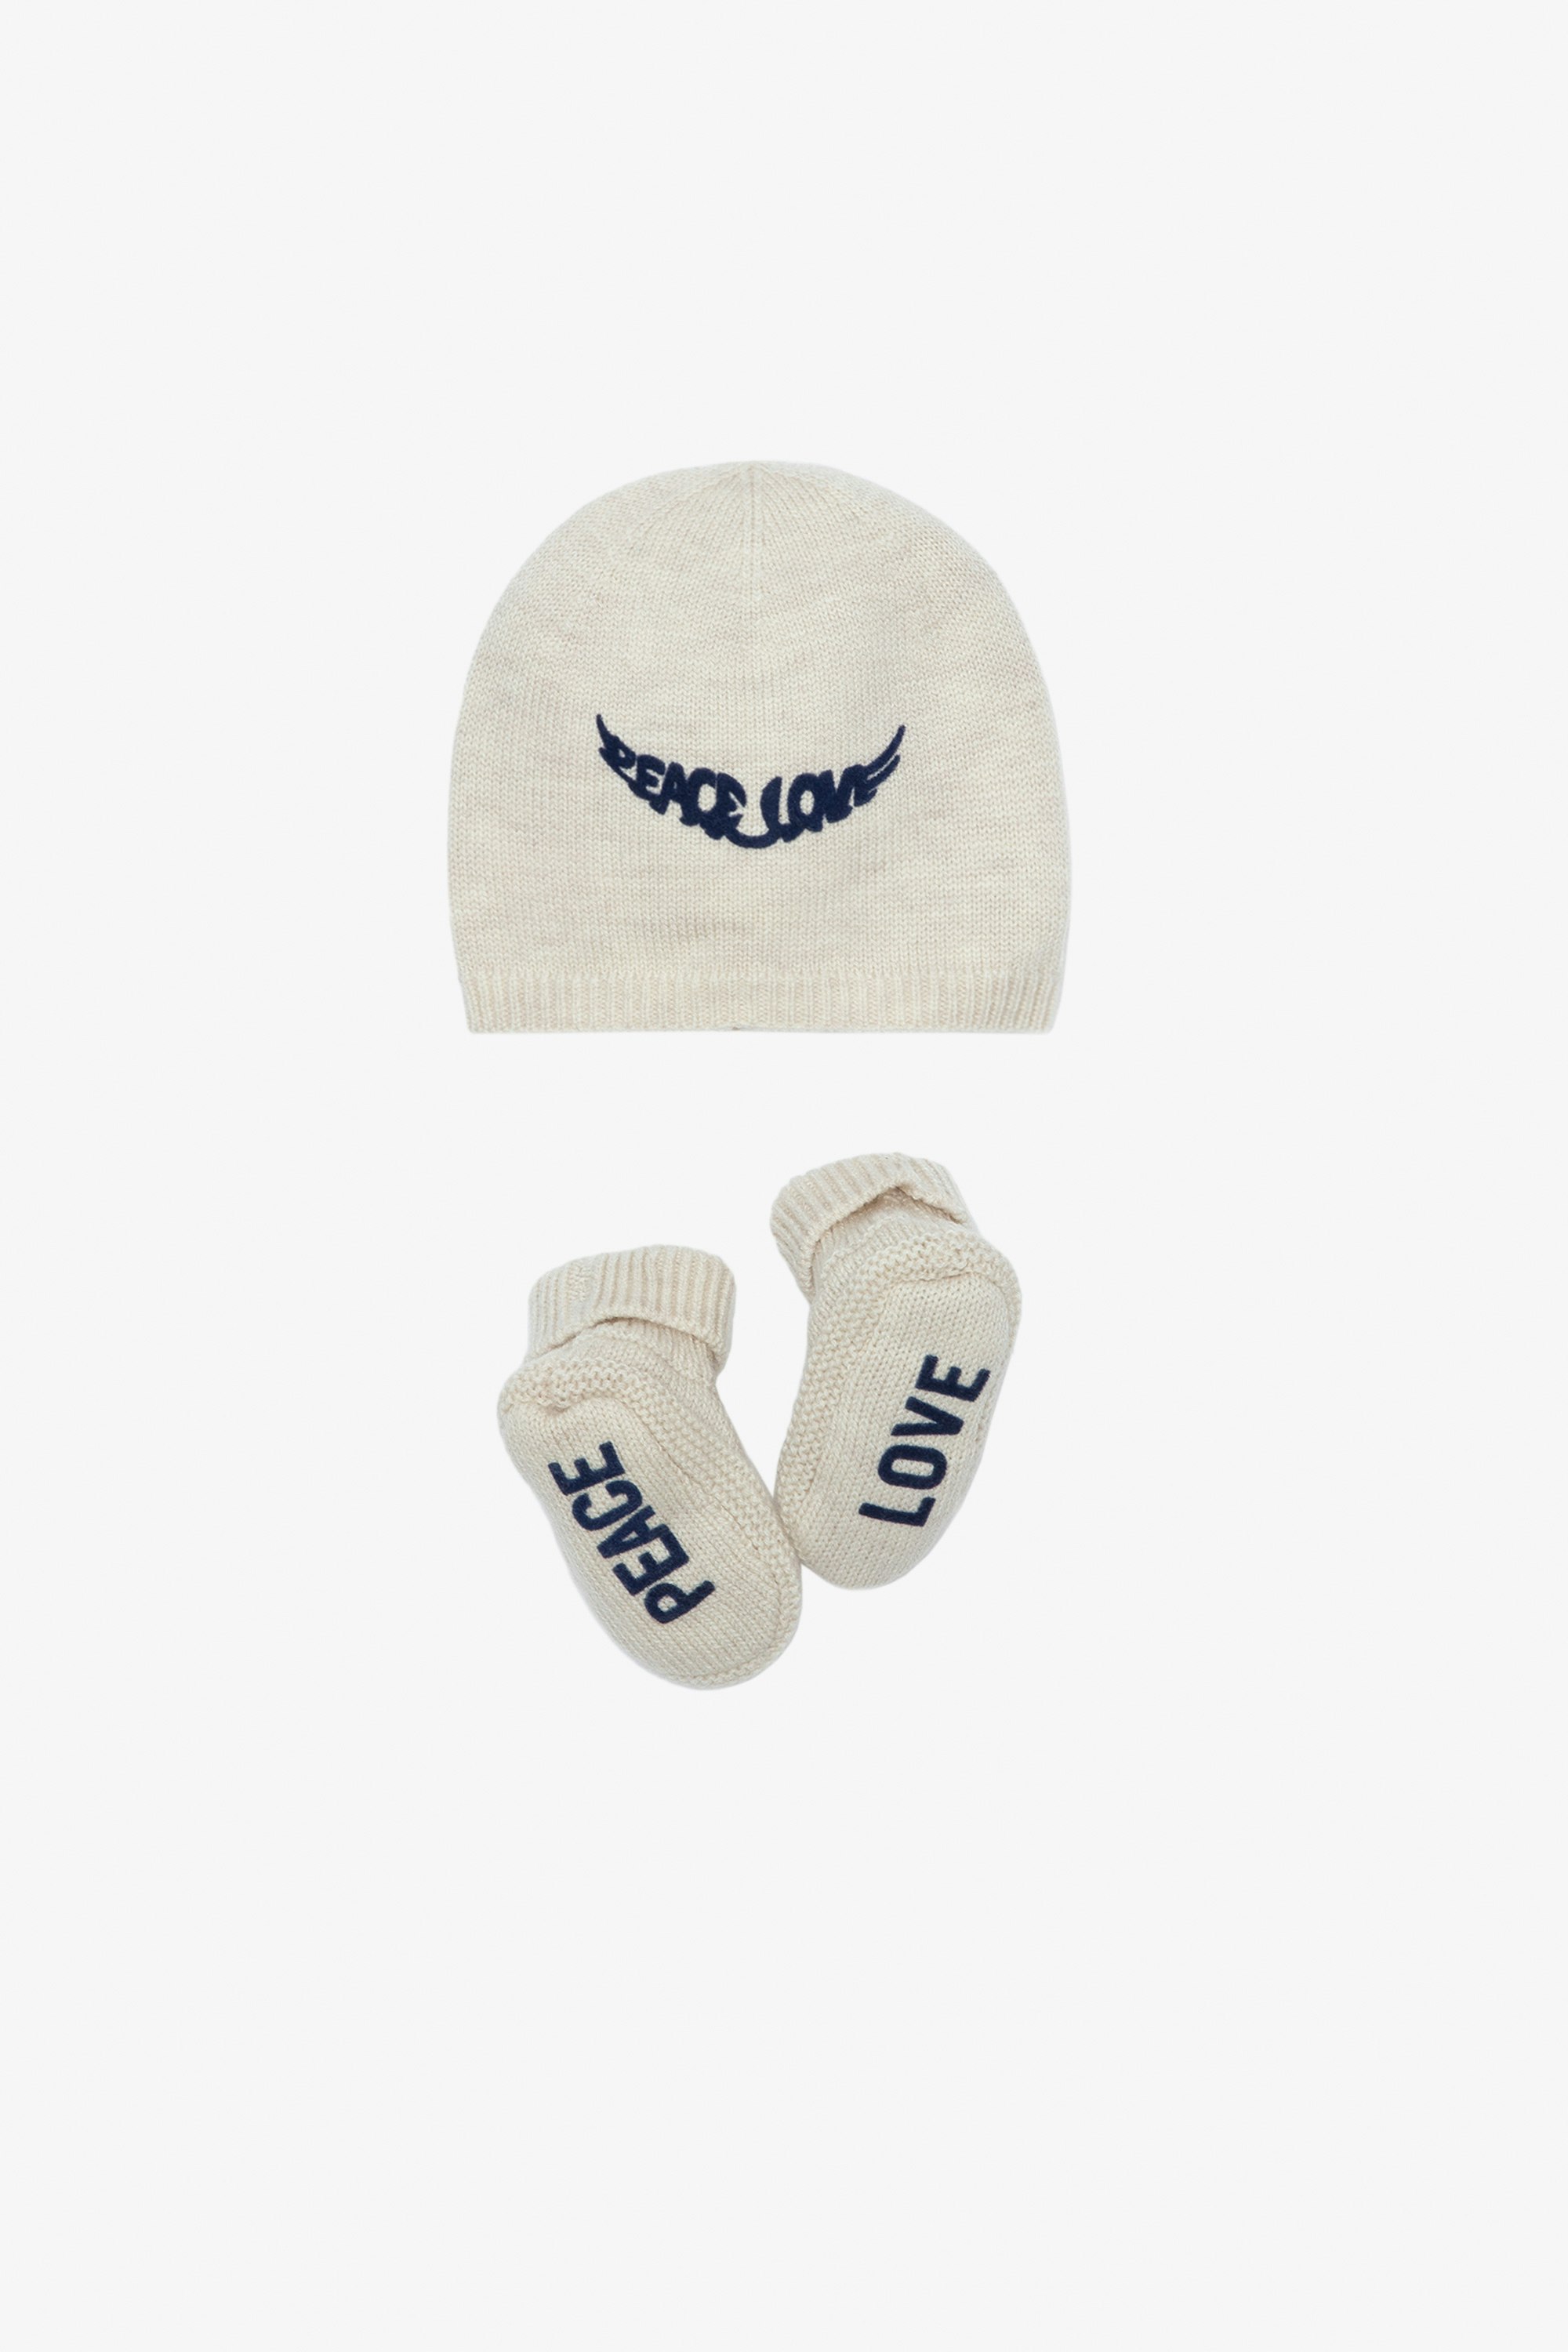 Molly Baby Set - Beanie and booties two-piece baby set in an ecru knit with “Peace” and “Love” slogans.